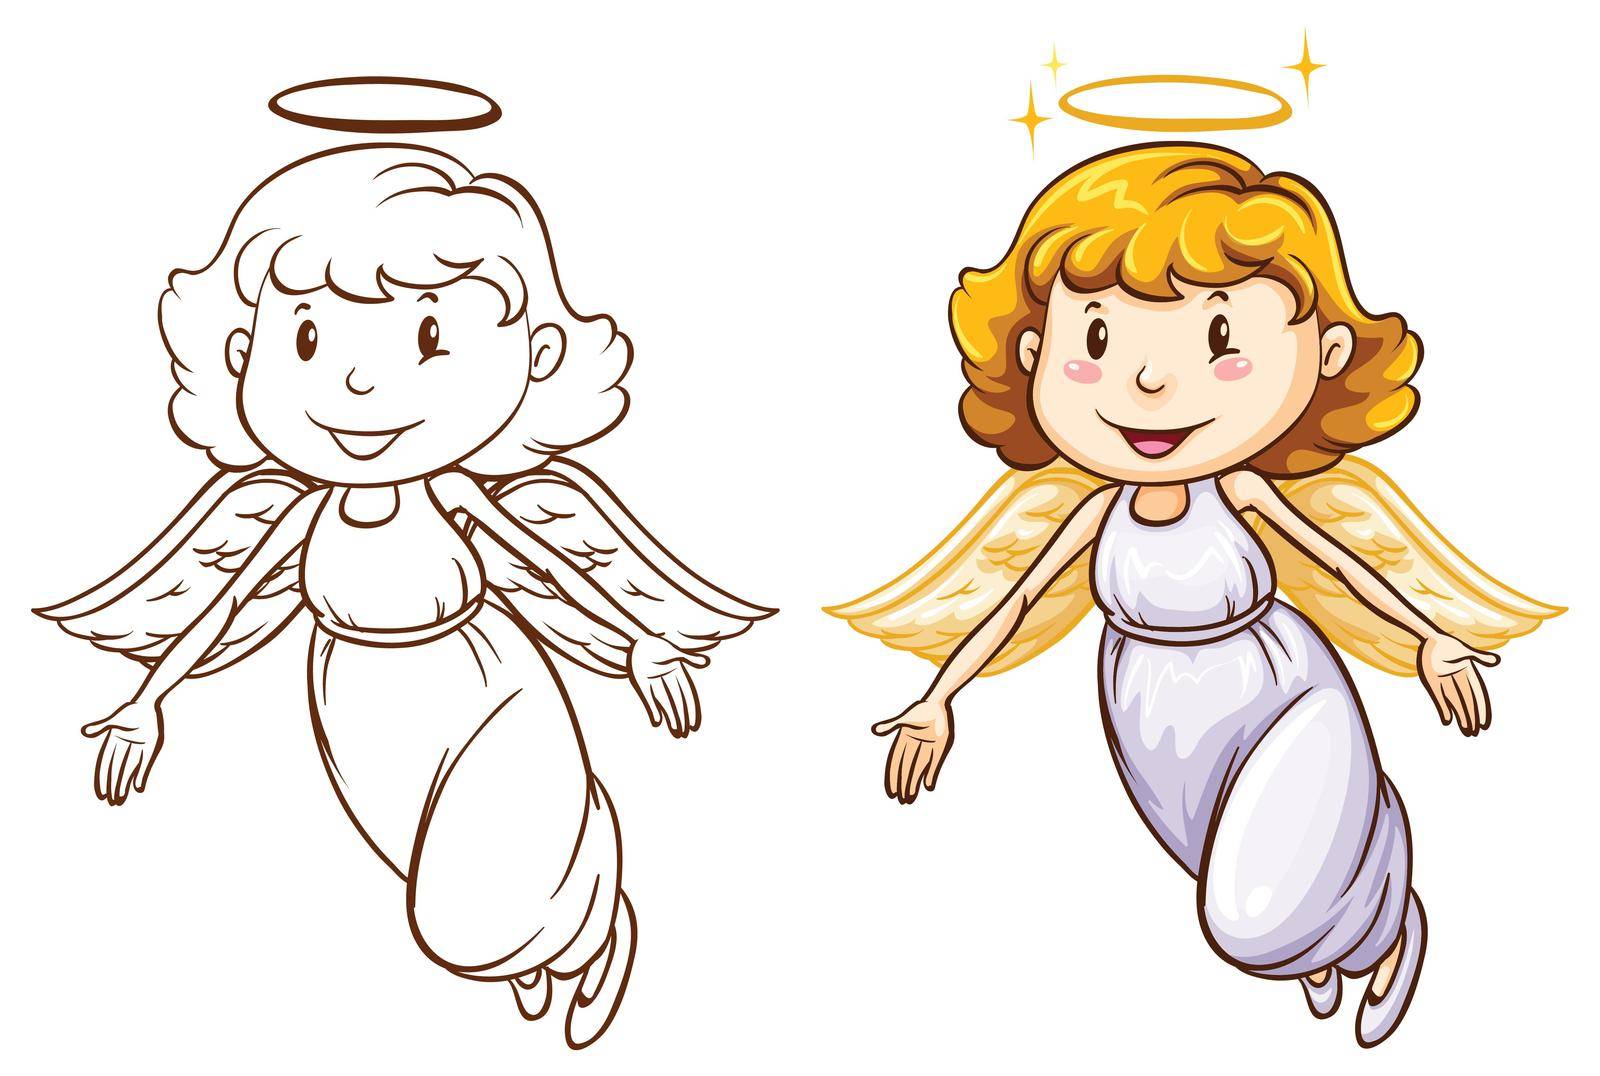 Illustration of the sketches of angels in different colors on a white background